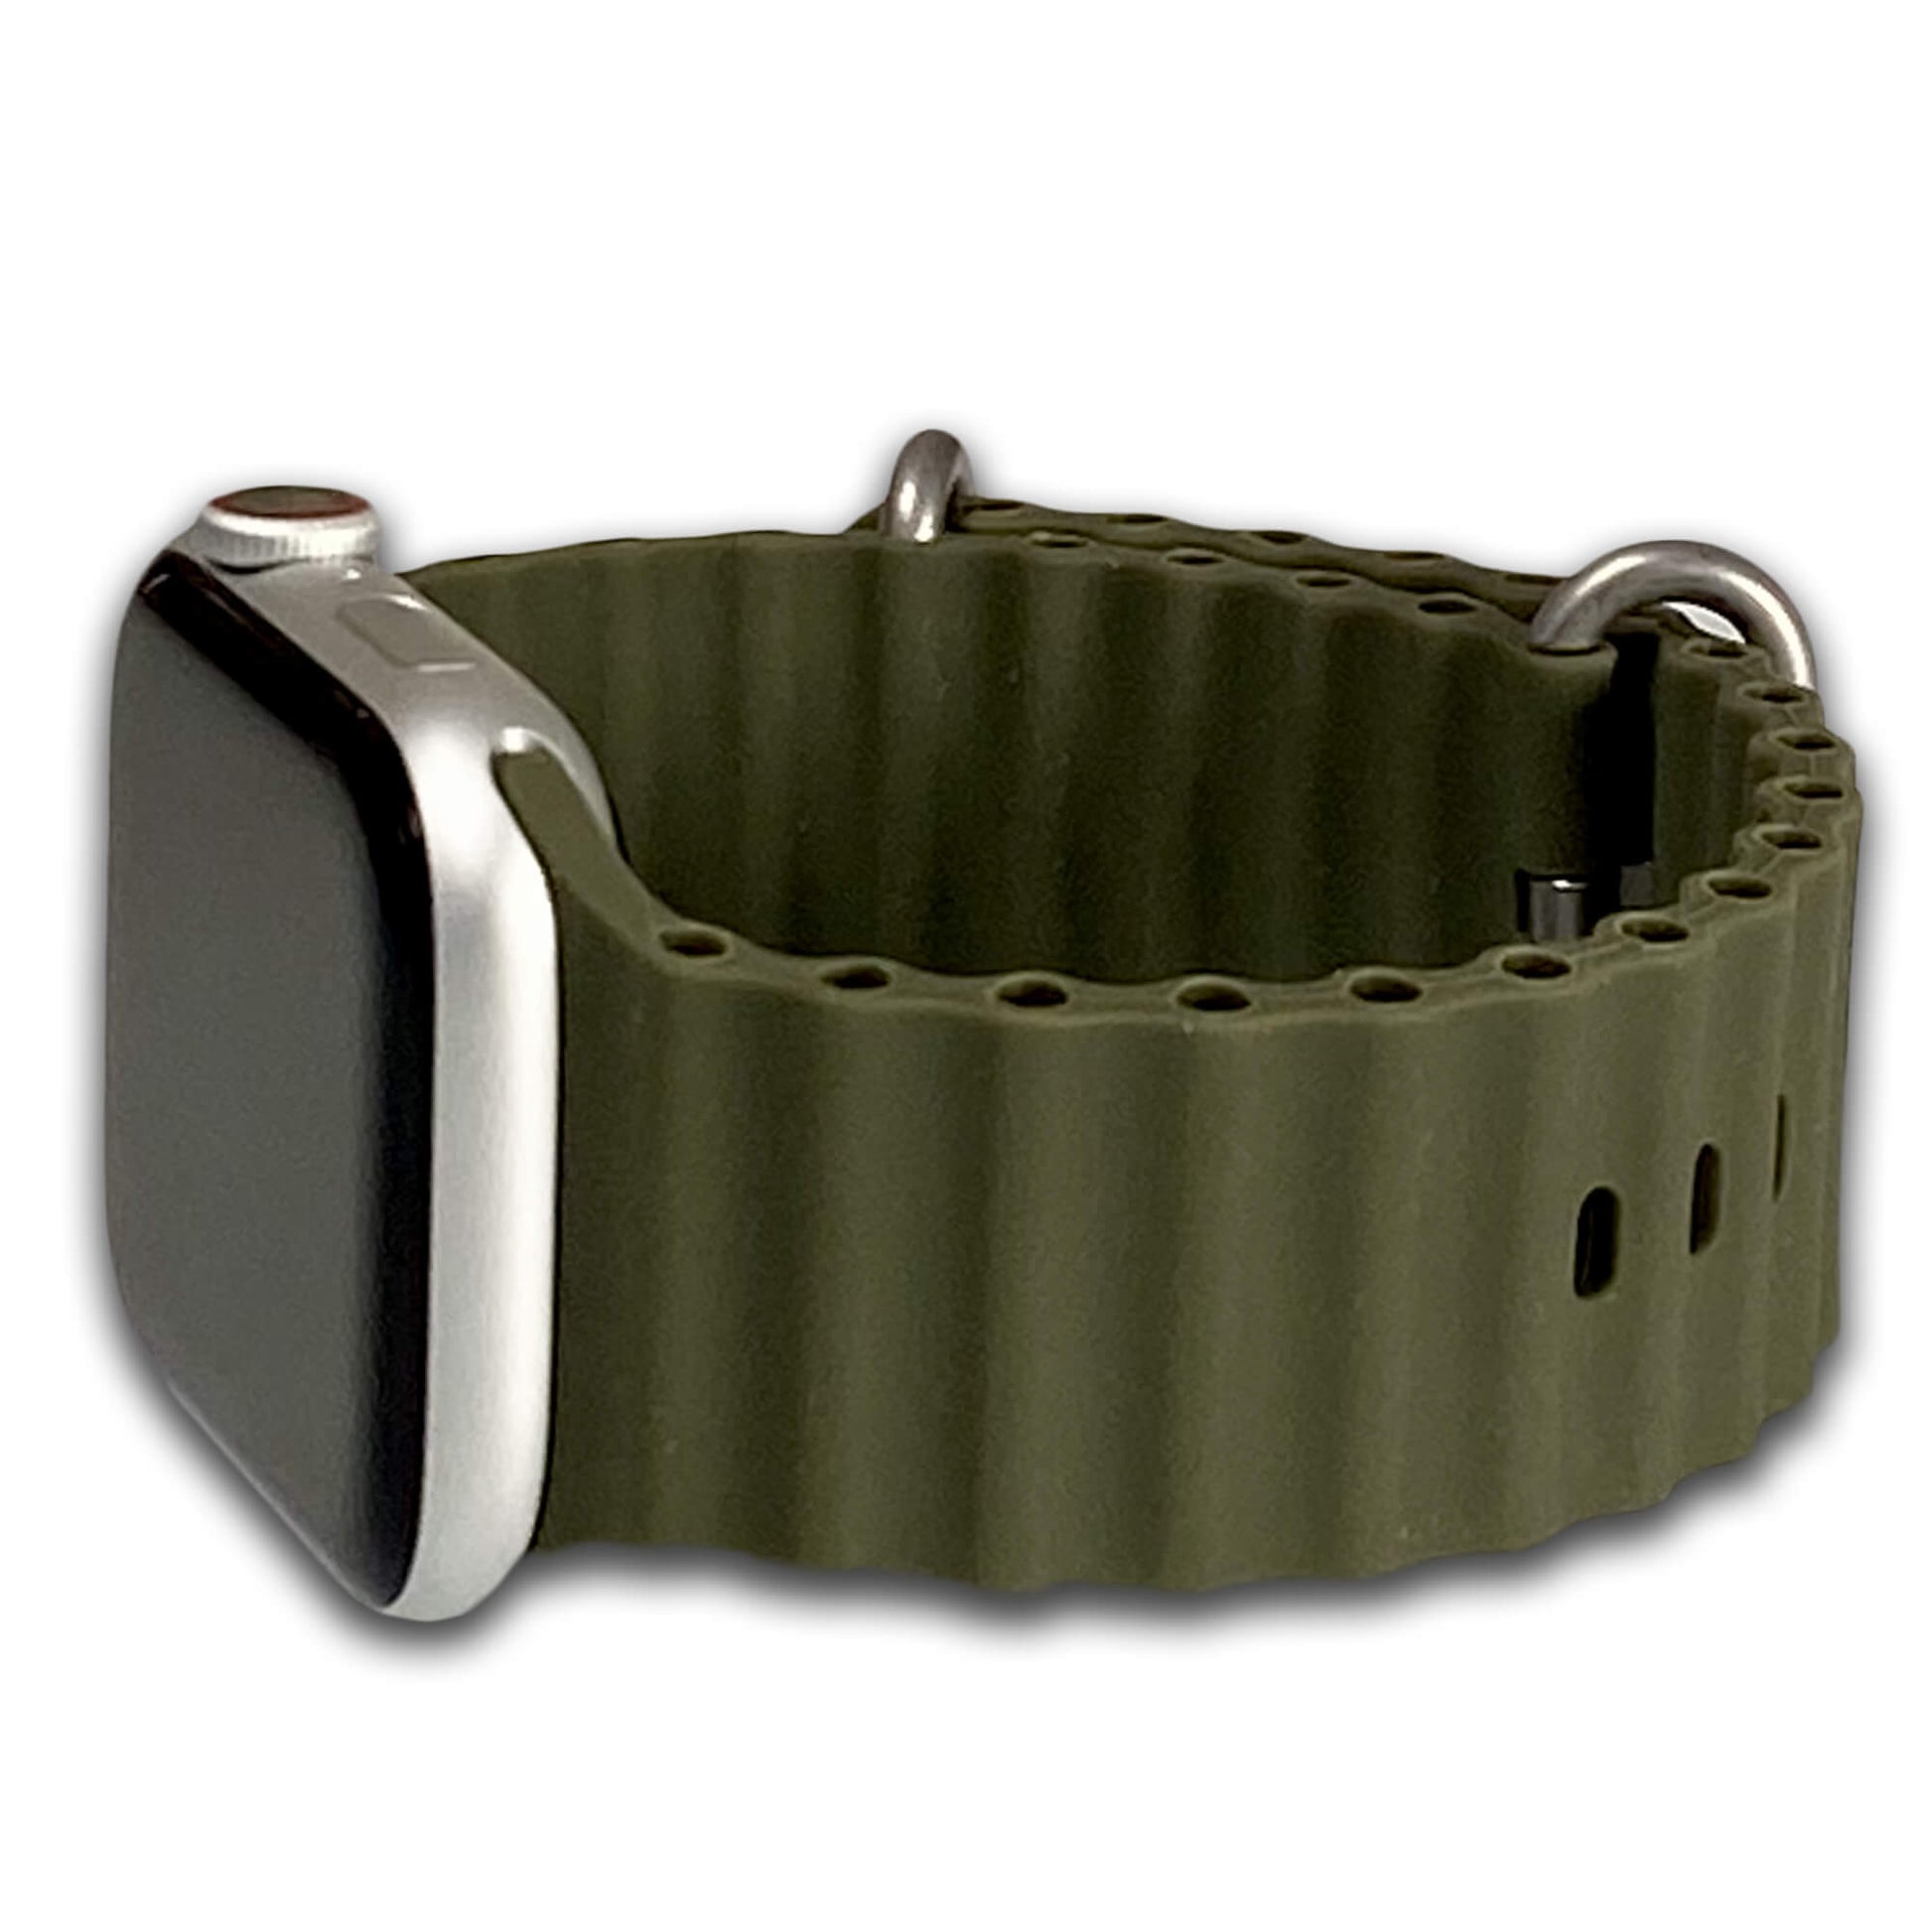 Military Green Ocean Style Silicone Apple Watch Band